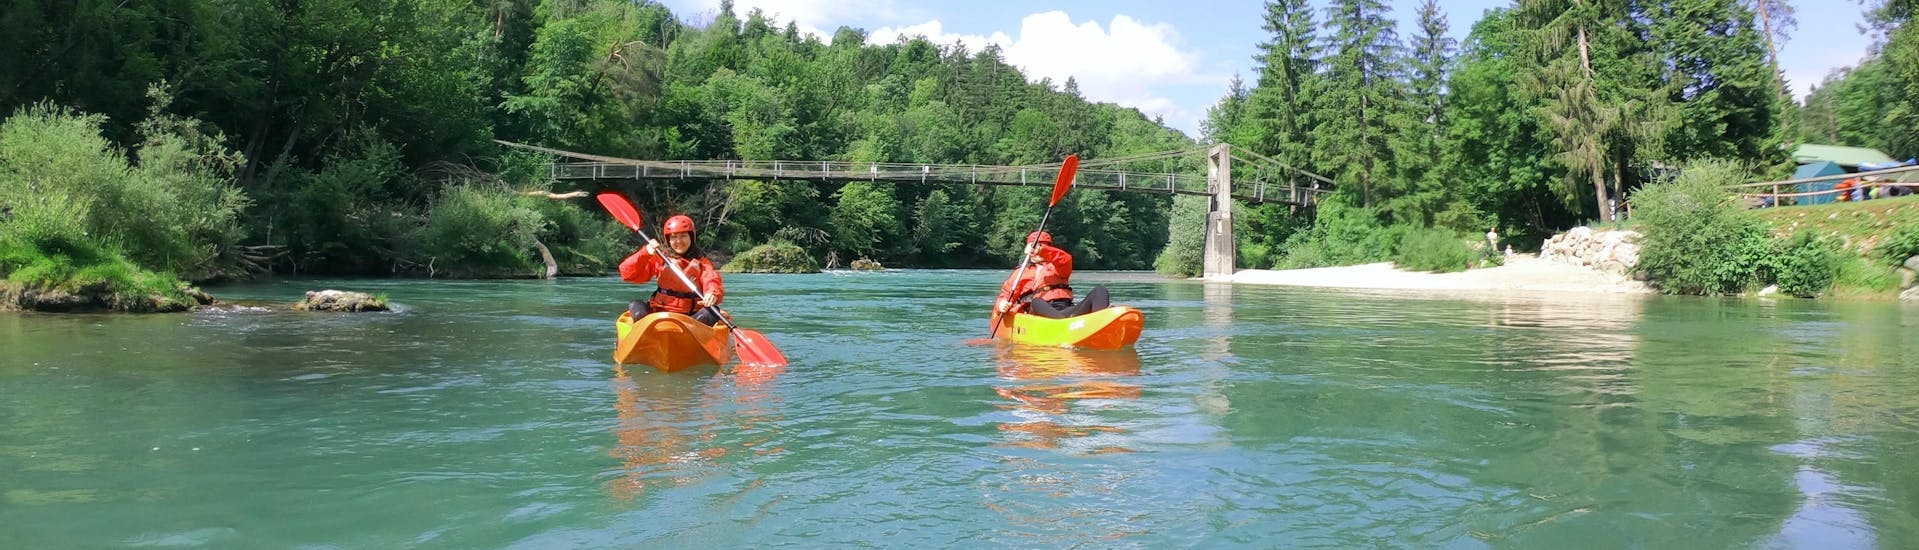 2 Friends enjoying a 9km Kayaking on the Dolinka River from Bled with Outdoor Slovenia Bled.